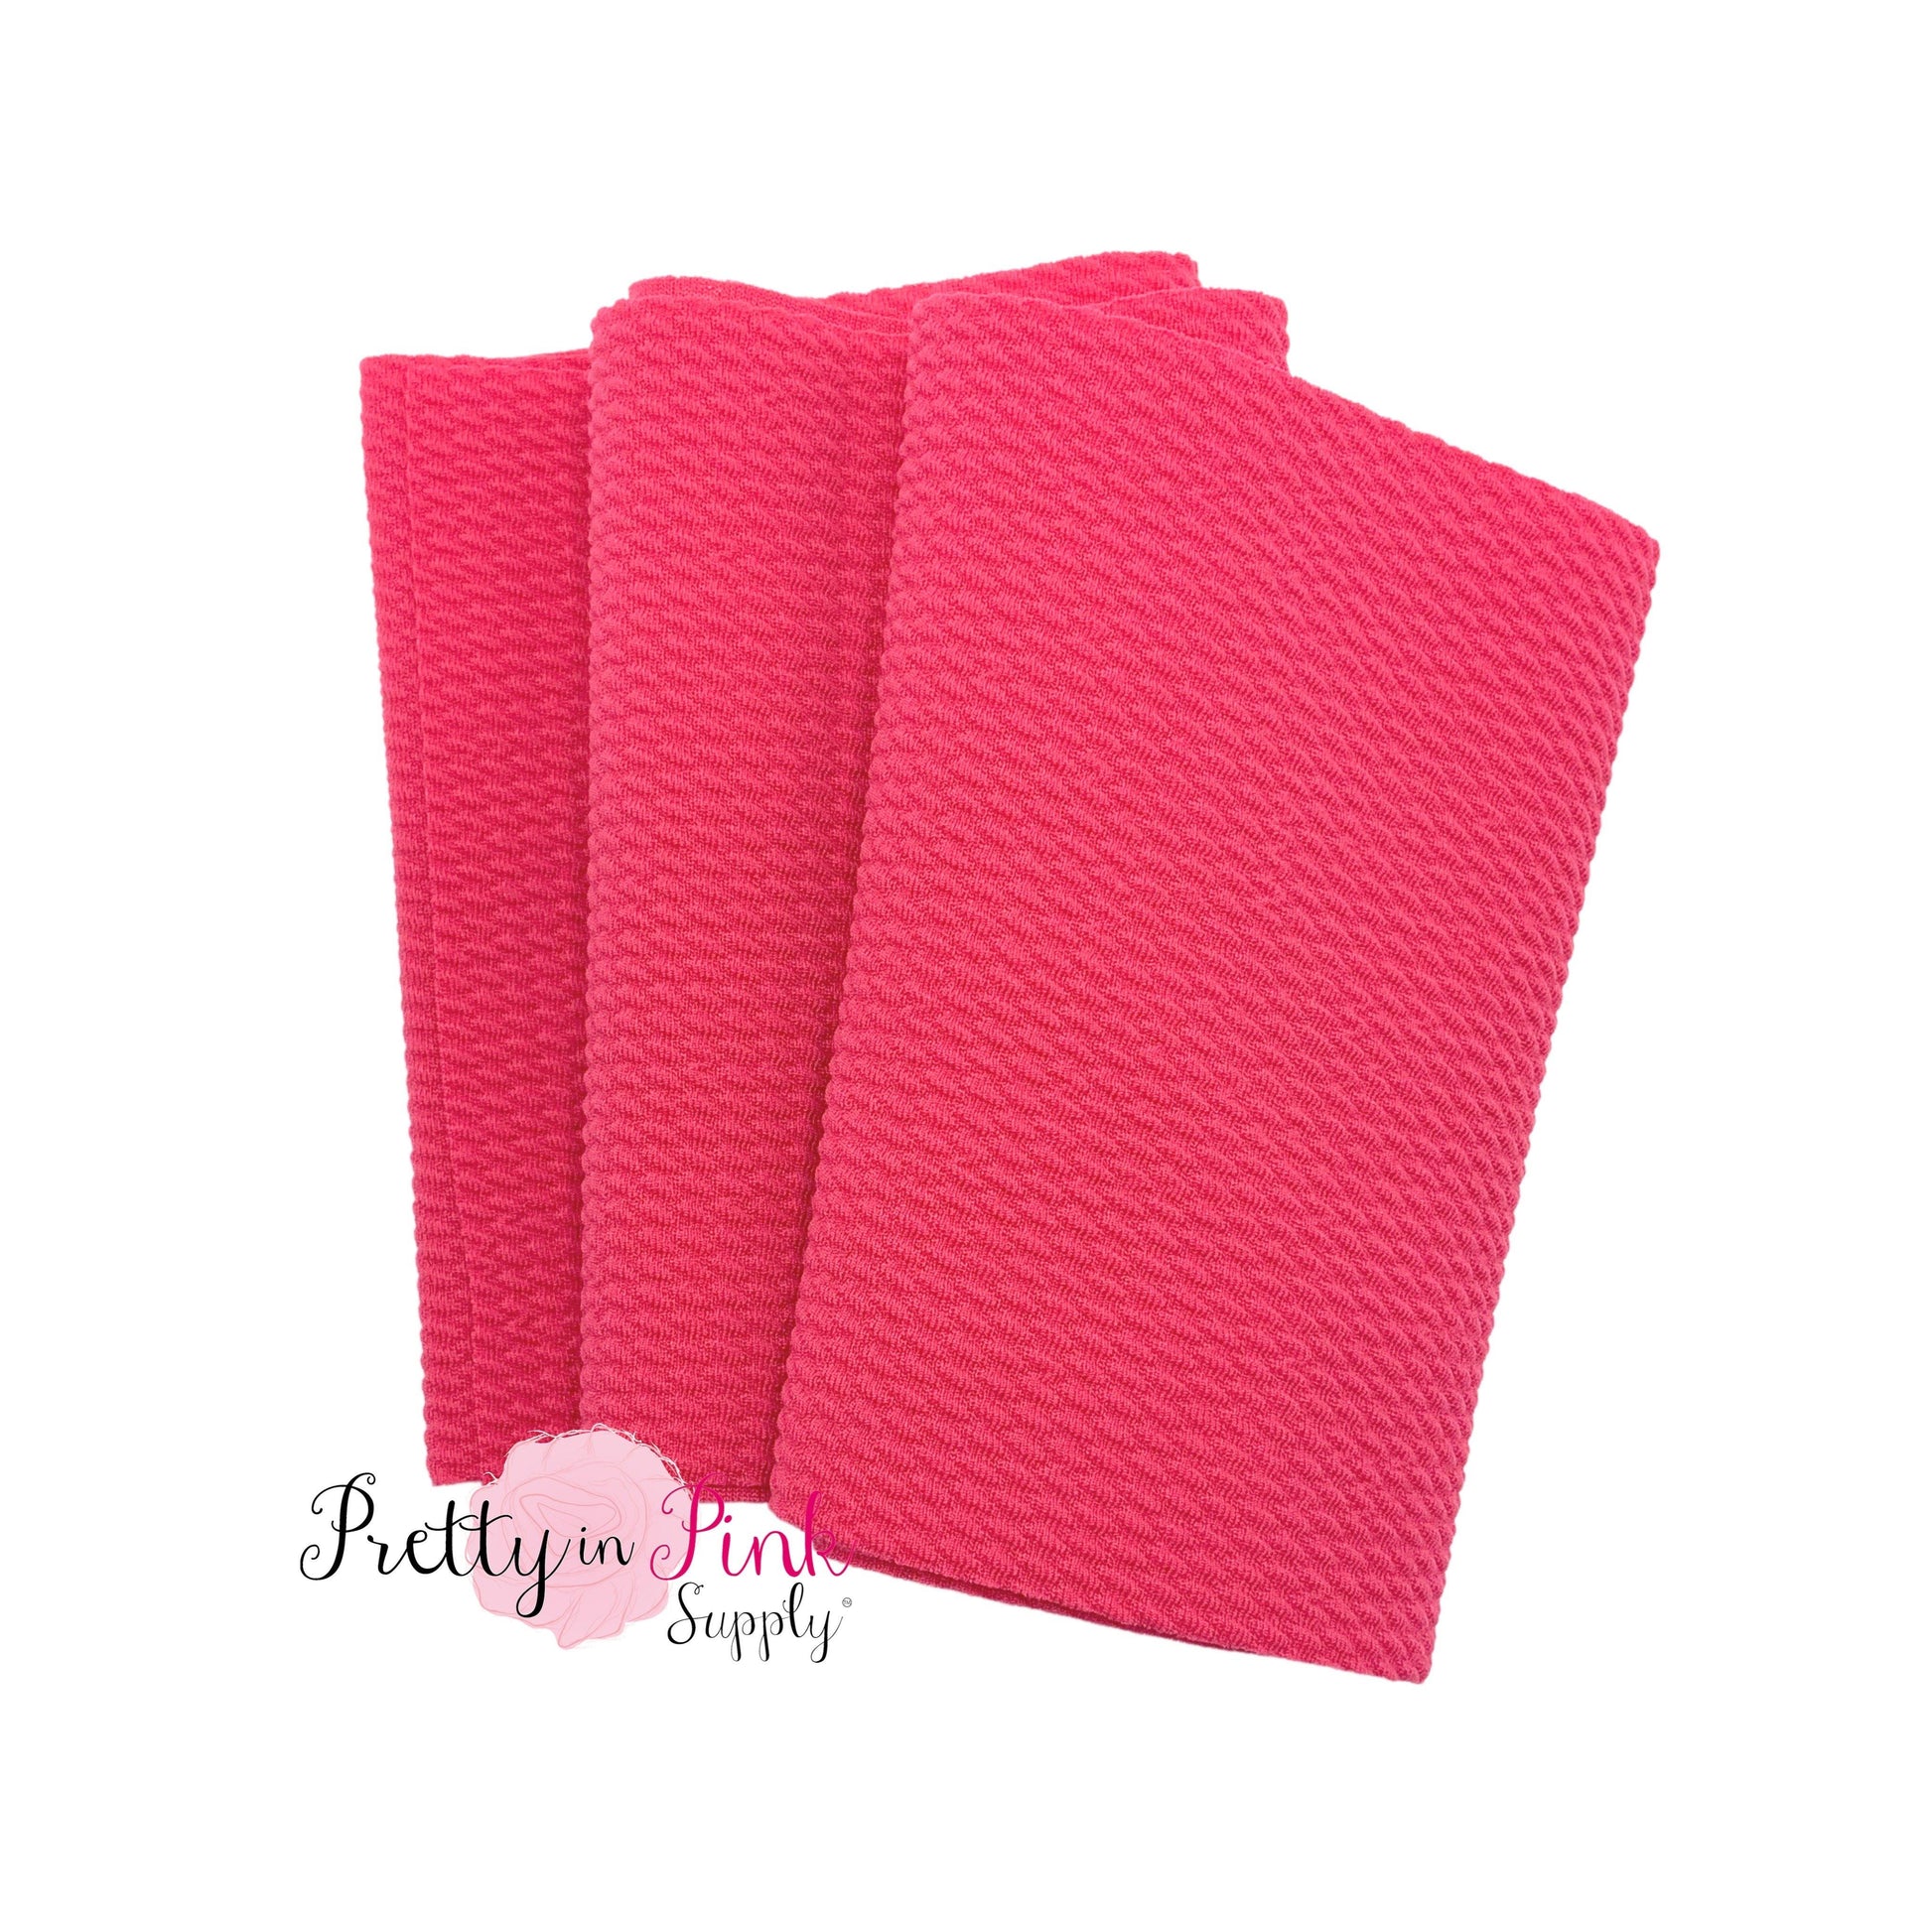 Folded over solid hot pink color textured, stretch liverpool fabric strip.